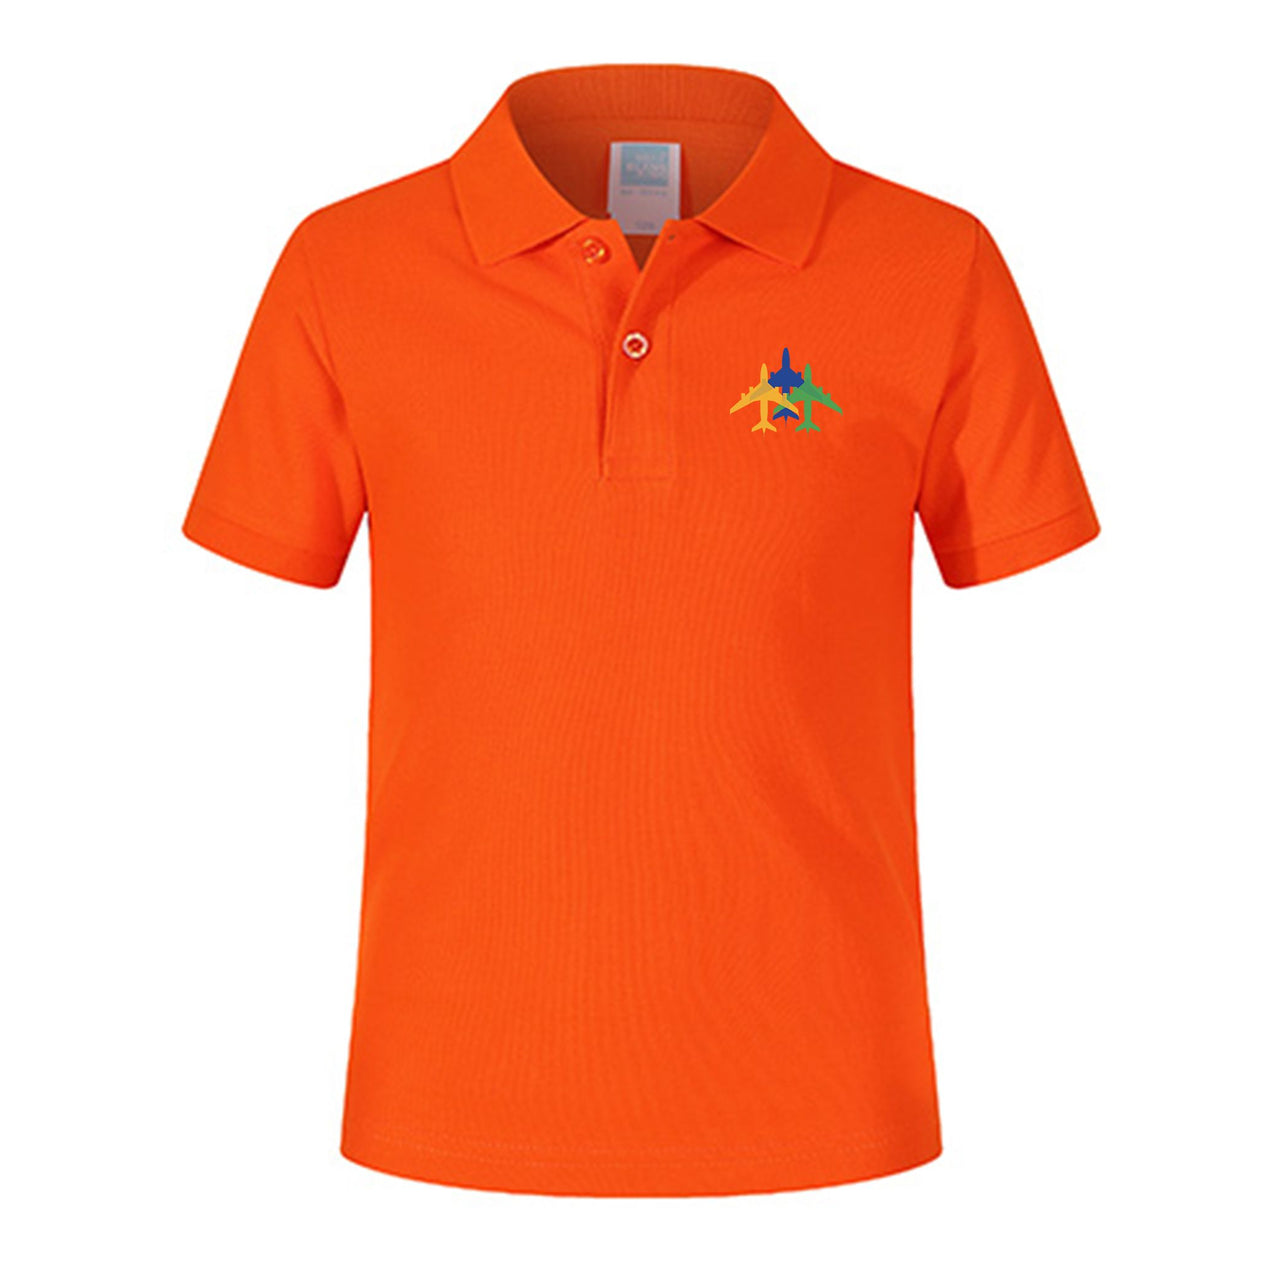 Colourful 3 Airplanes Designed Children Polo T-Shirts